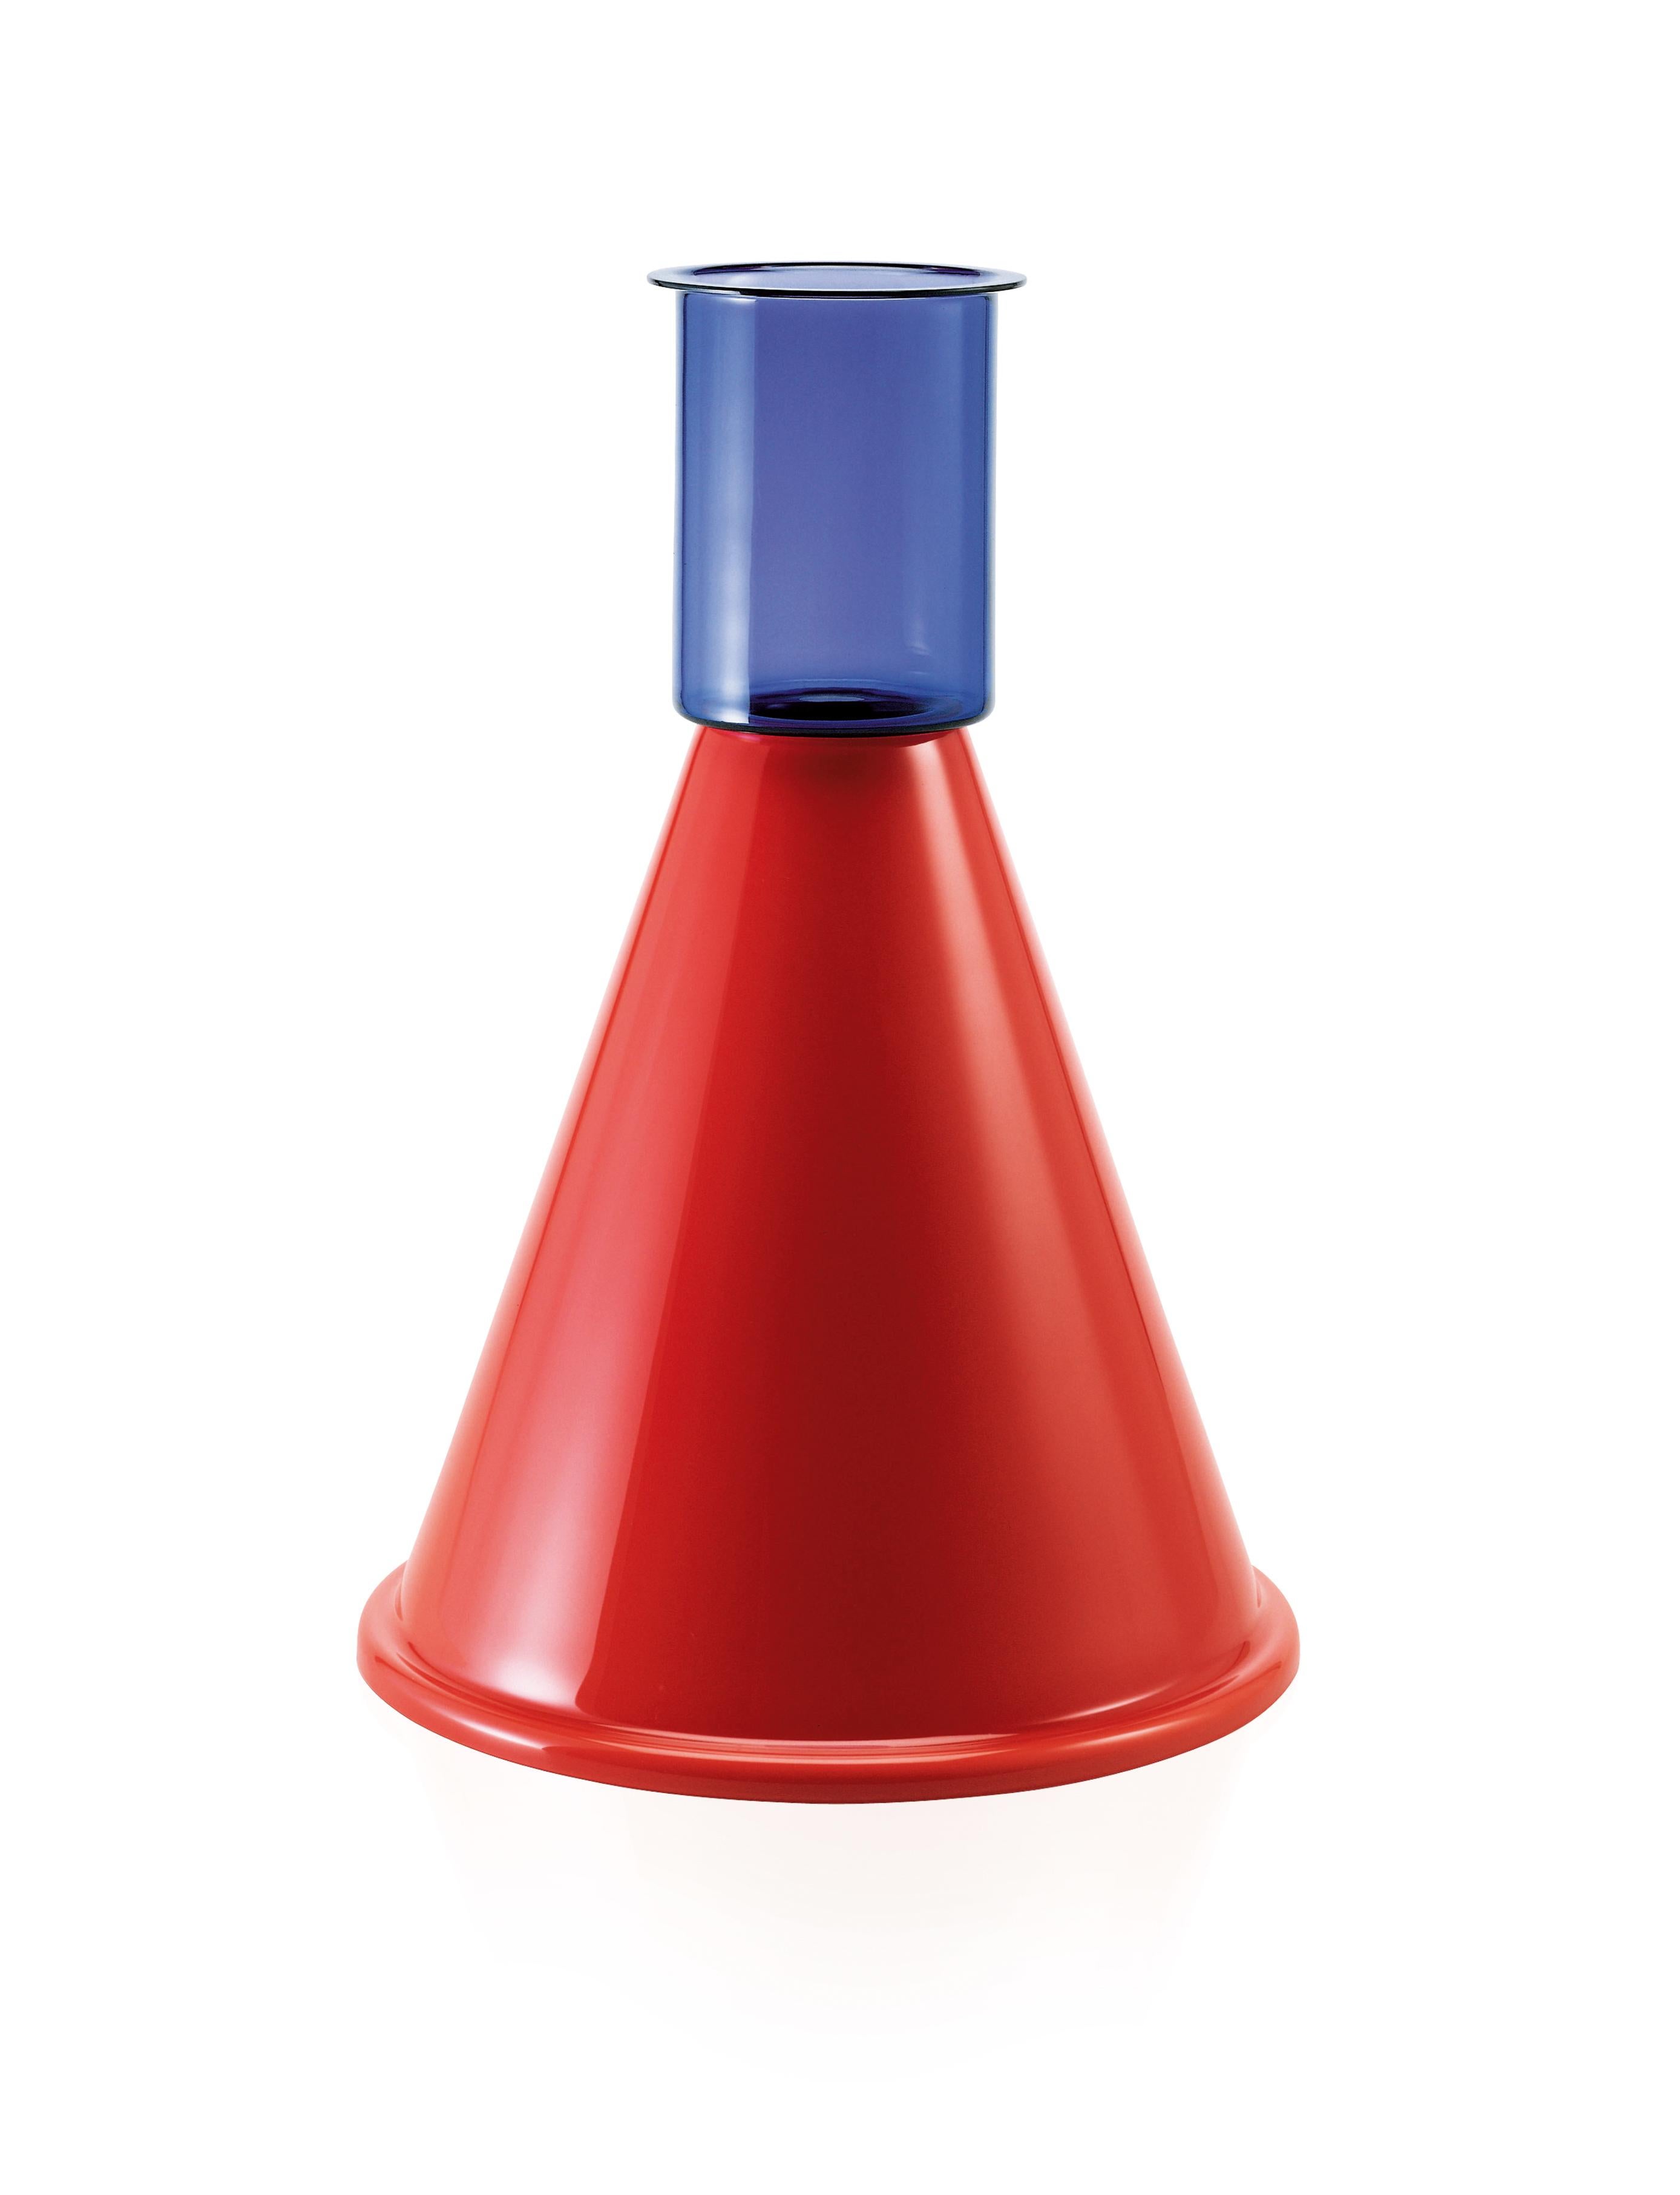 Venini geometric glass vase with angular body in midnight blue and red designed by Ettore Sottsass in 2001. Perfect for indoor home decor as container or strong statement piece for any room. Limited production of only 99 pieces.

Dimensions: 36 cm